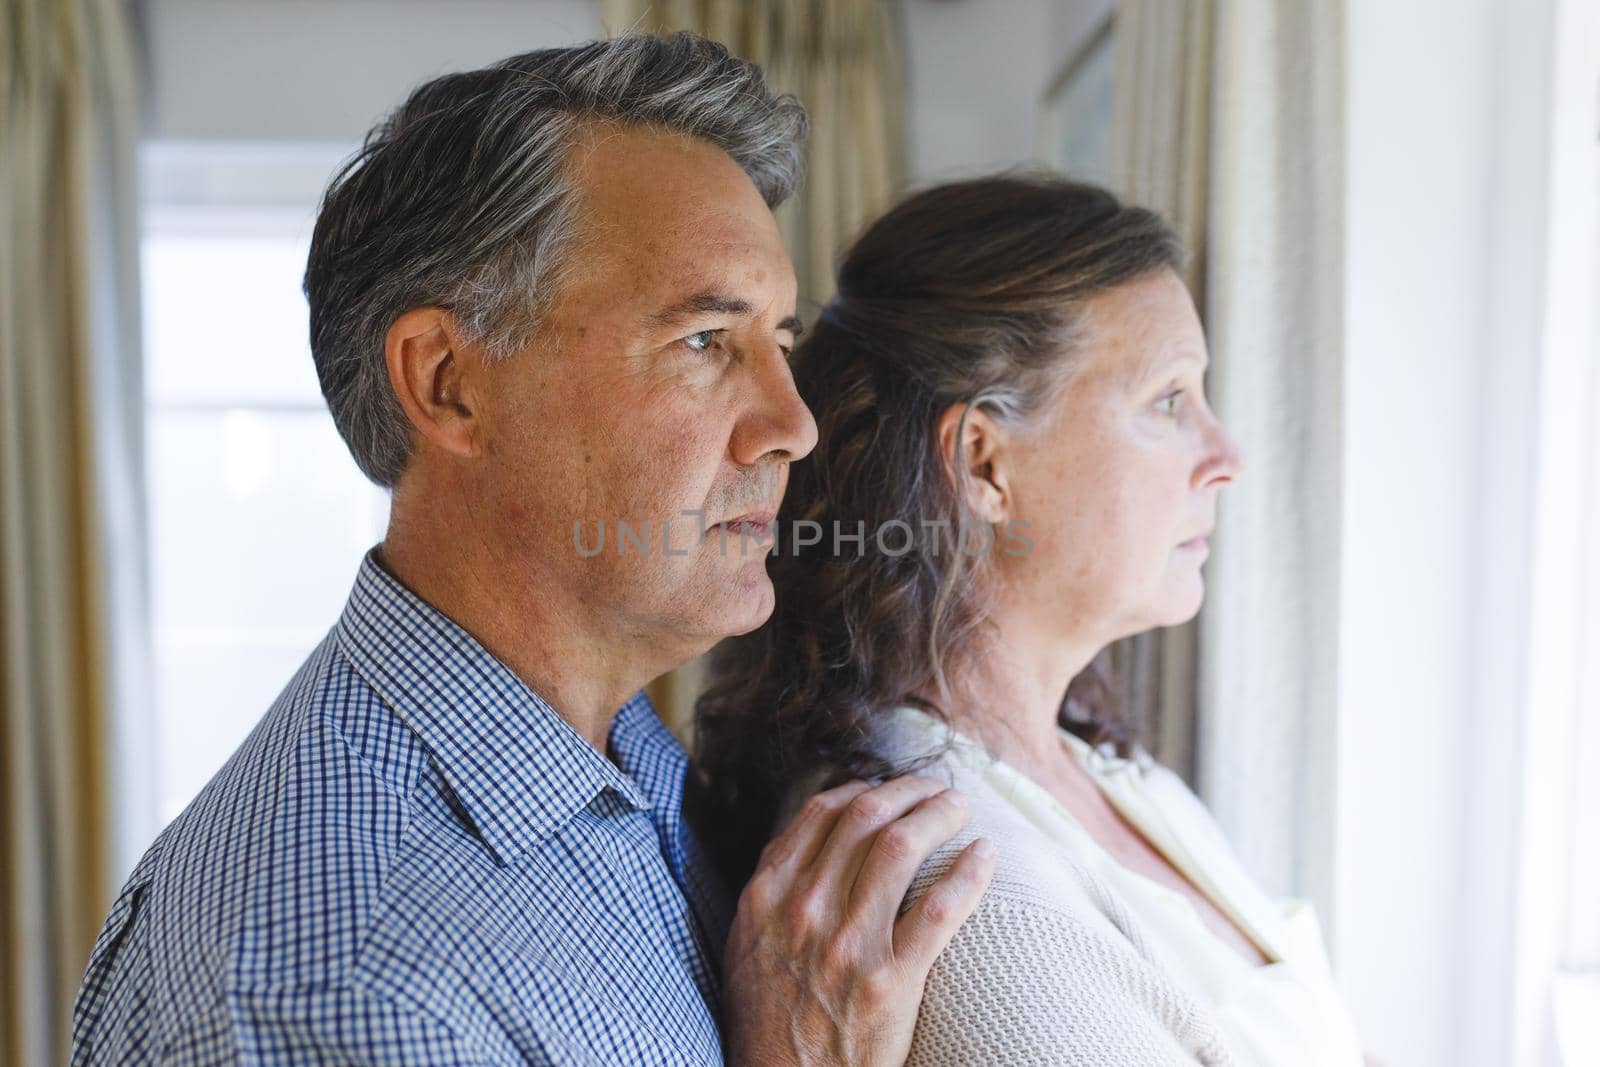 Thoughtful senior caucasian couple standing next to window, embracing by Wavebreakmedia